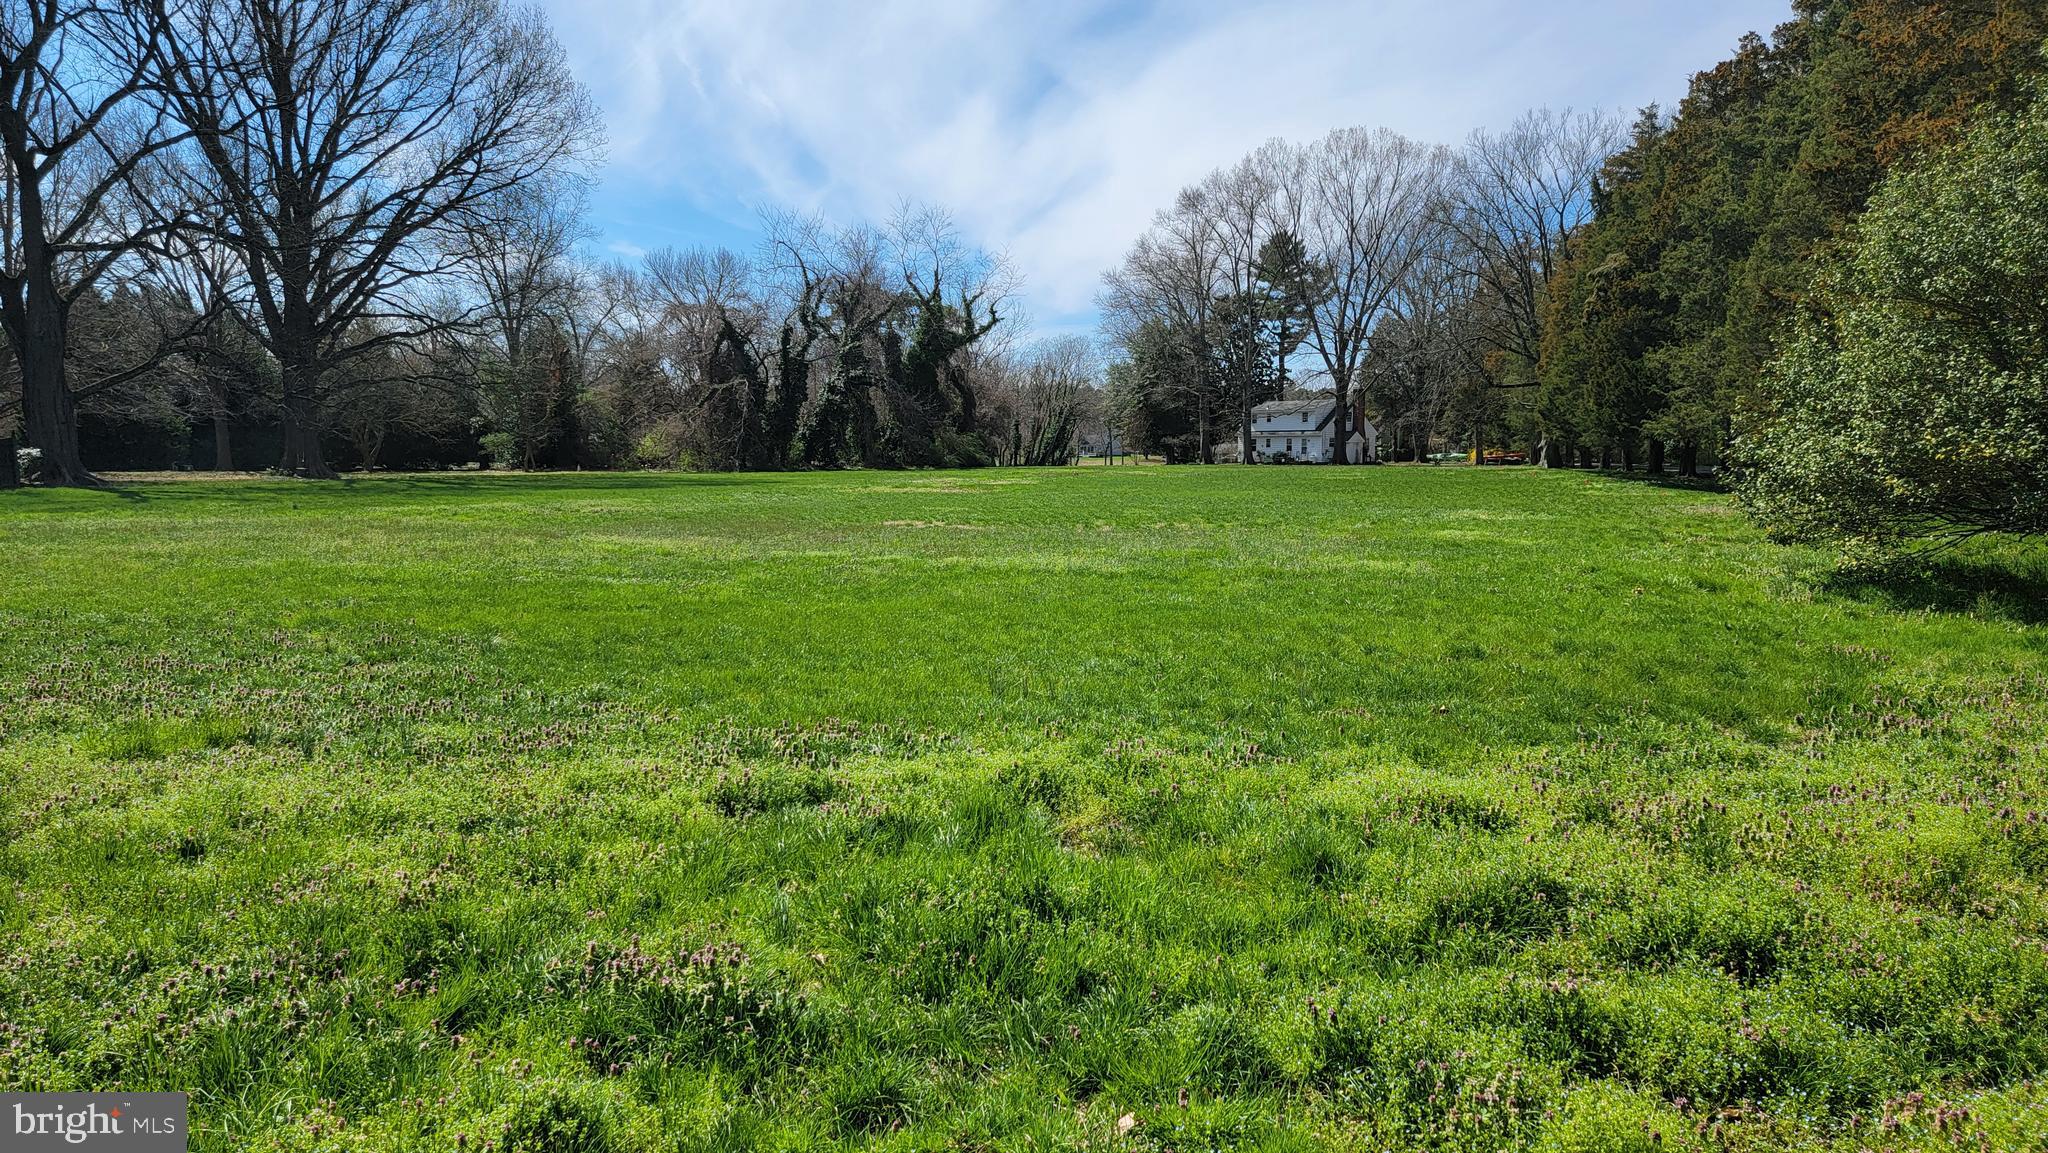 a view of green field with trees in the background